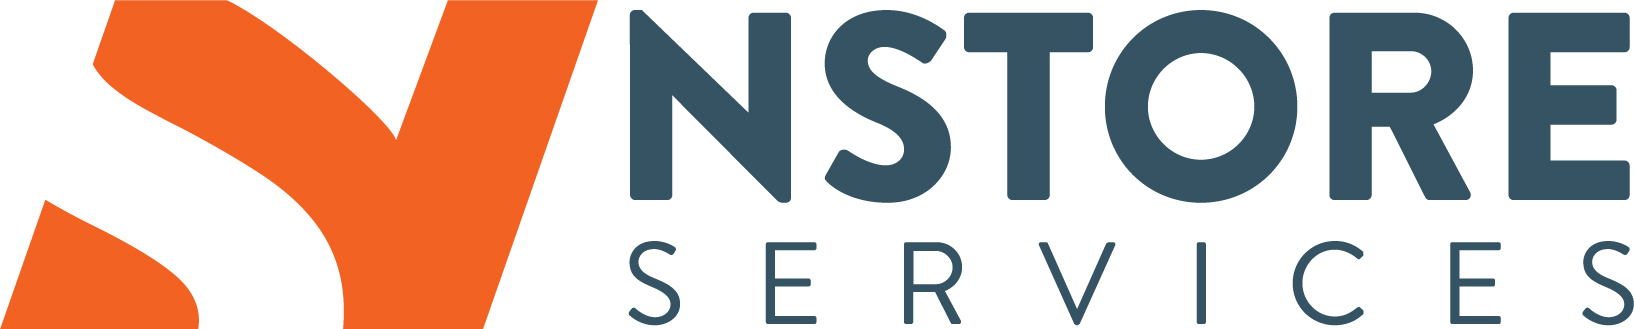 N-Store Services logo